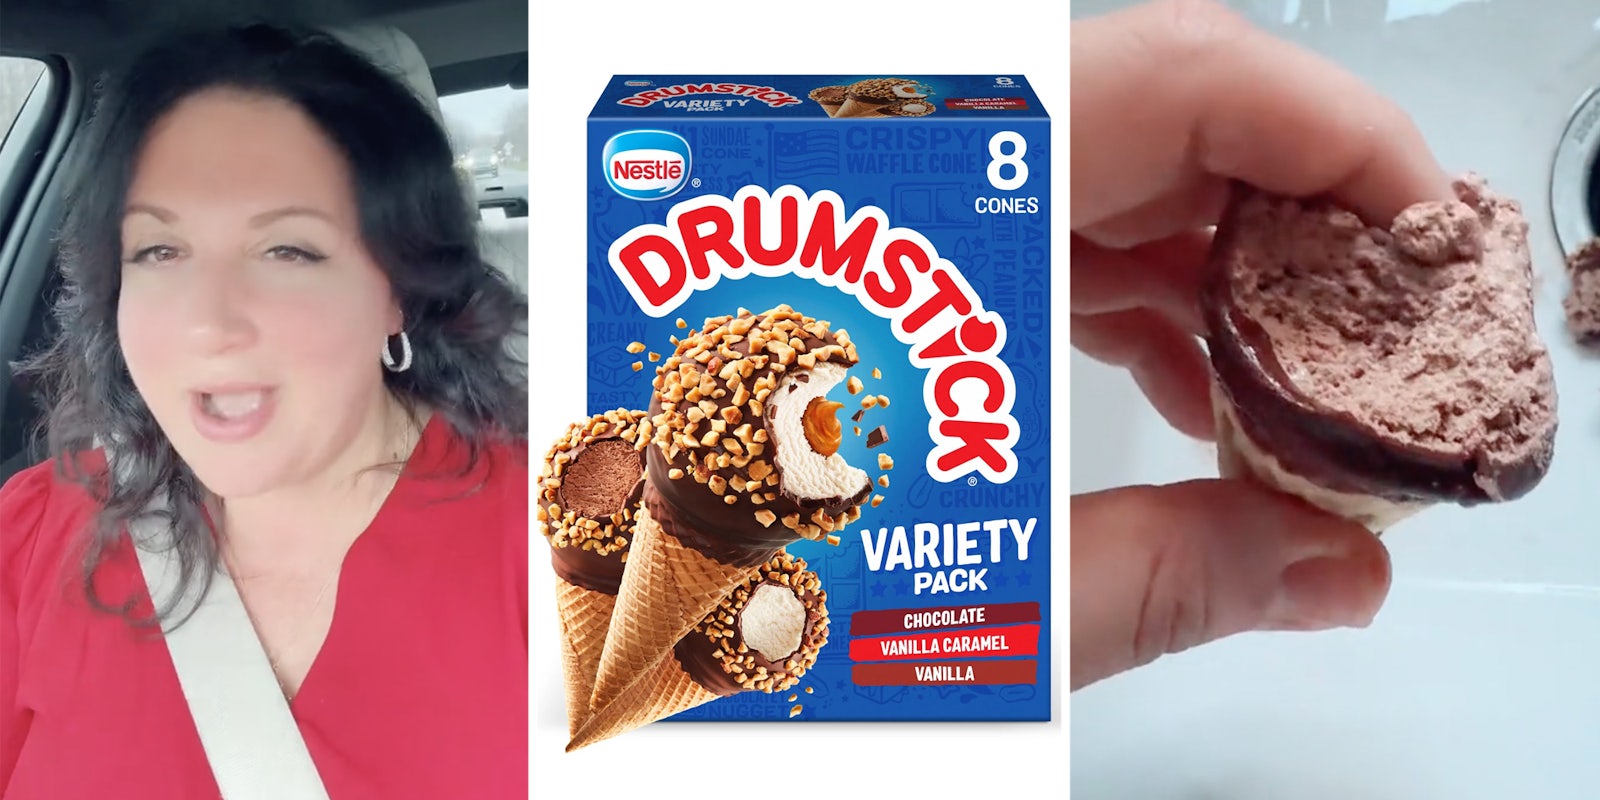 Woman talking(l), Box of Drumsticks(c), Hand holding unmelted drumstick(r)